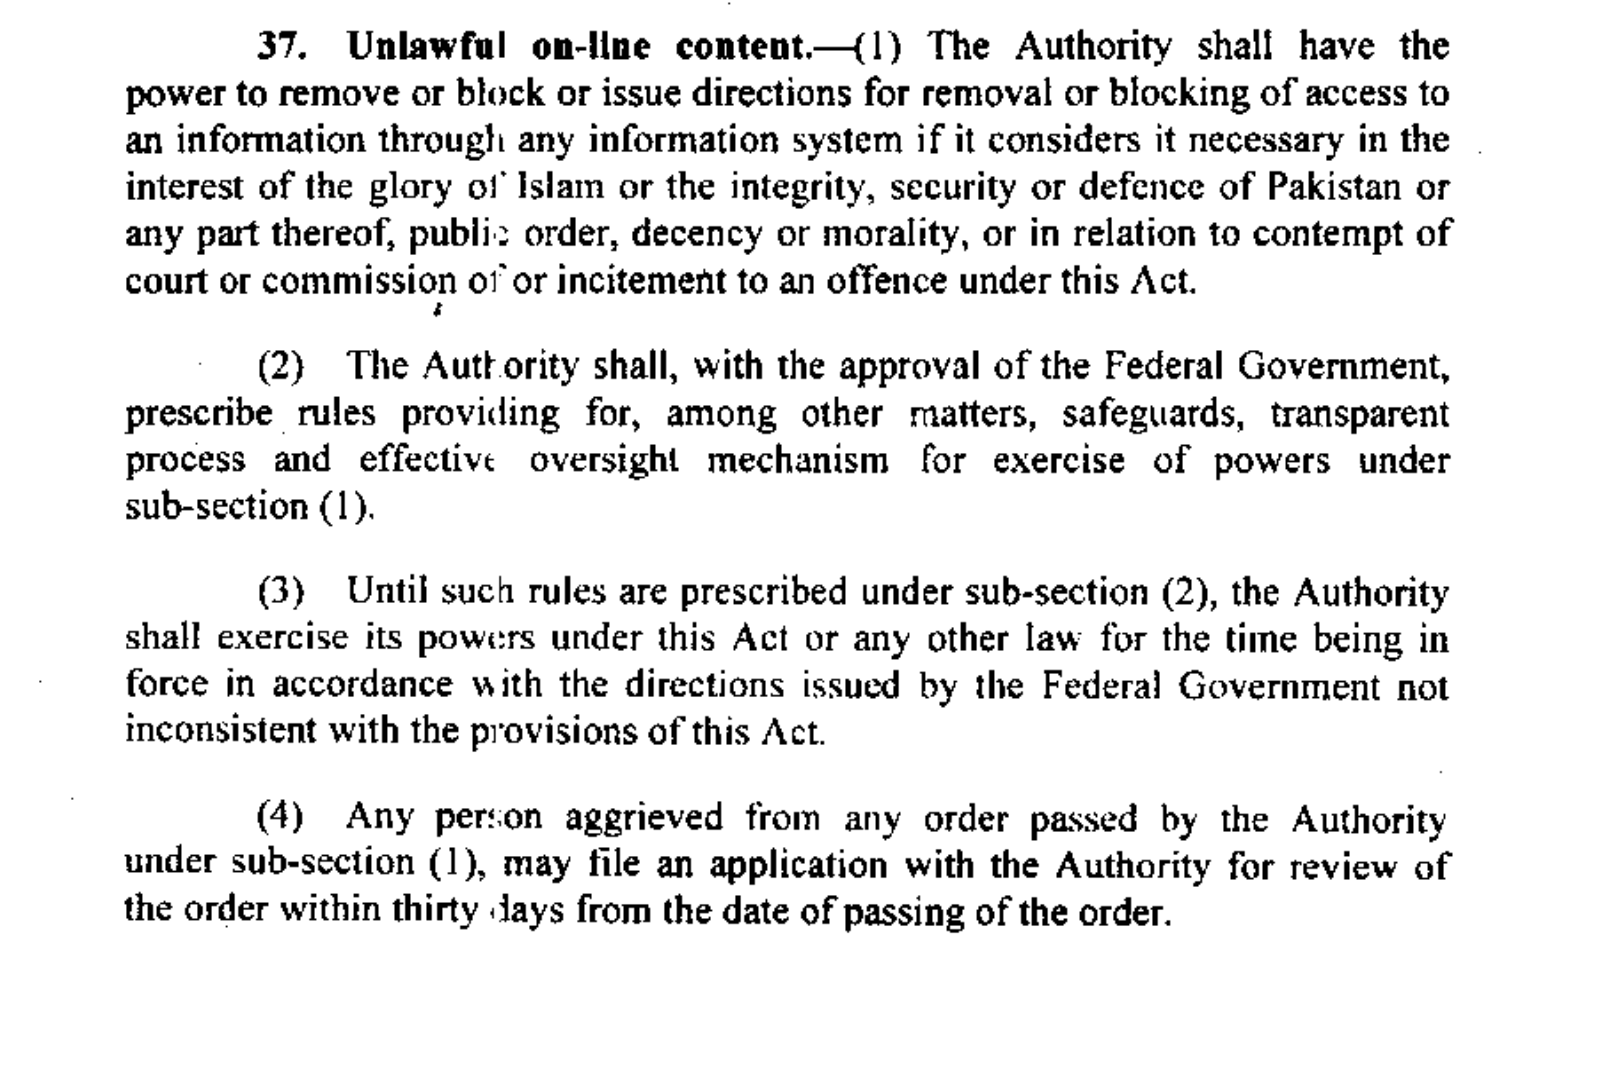 Section 37 of Pakistan’s cybercrime law, the Prevention of Electronic Crimes Act (PECA) 2016.